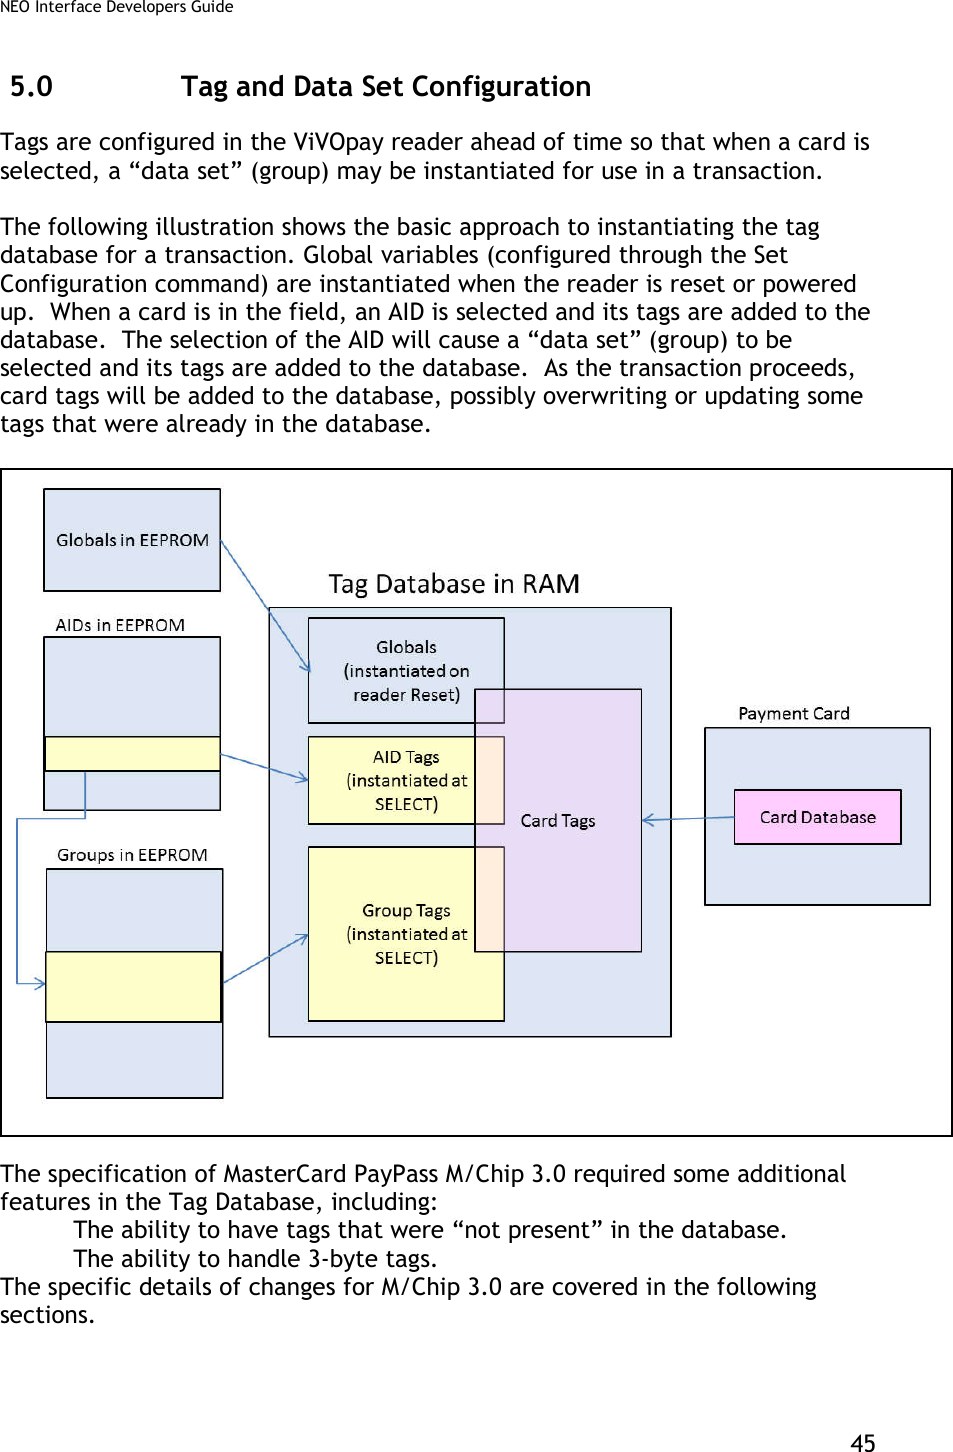 NEO Interface Developers Guide           45 5.0 Tag and Data Set Configuration Tags are configured in the ViVOpay reader ahead of time so that when a card is selected, a “data set” (group) may be instantiated for use in a transaction.  The following illustration shows the basic approach to instantiating the tag database for a transaction. Global variables (configured through the Set Configuration command) are instantiated when the reader is reset or powered up.  When a card is in the field, an AID is selected and its tags are added to the database.  The selection of the AID will cause a “data set” (group) to be selected and its tags are added to the database.  As the transaction proceeds, card tags will be added to the database, possibly overwriting or updating some tags that were already in the database.    The specification of MasterCard PayPass M/Chip 3.0 required some additional features in the Tag Database, including:  The ability to have tags that were “not present” in the database.    The ability to handle 3-byte tags. The specific details of changes for M/Chip 3.0 are covered in the following sections. 